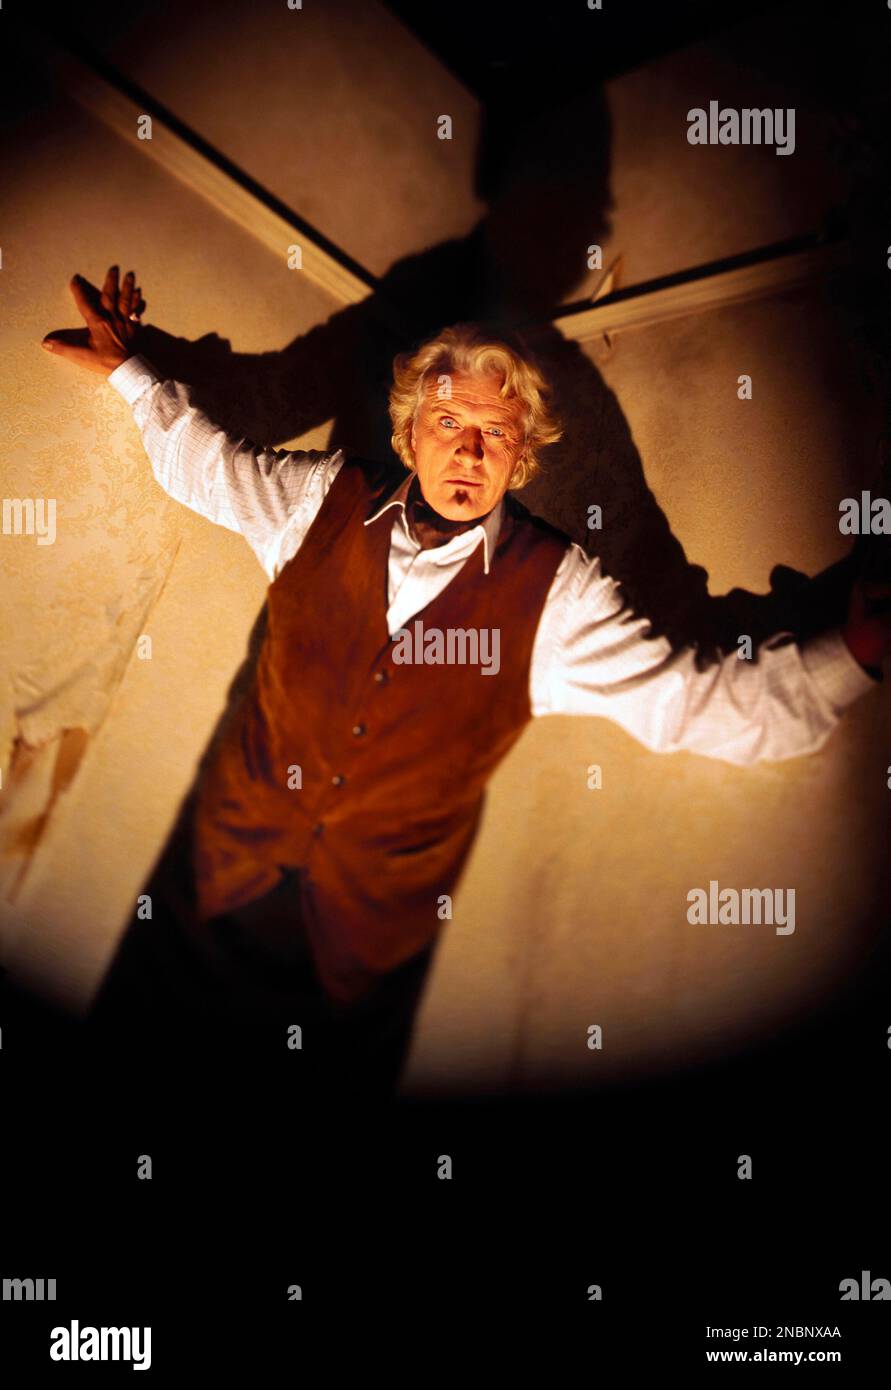 RUTGER HAUER in SALEM'S LOT (2004), directed by MIKAEL SALOMON. Credit: WARNER BROS. TELEVISION / Album Stock Photo